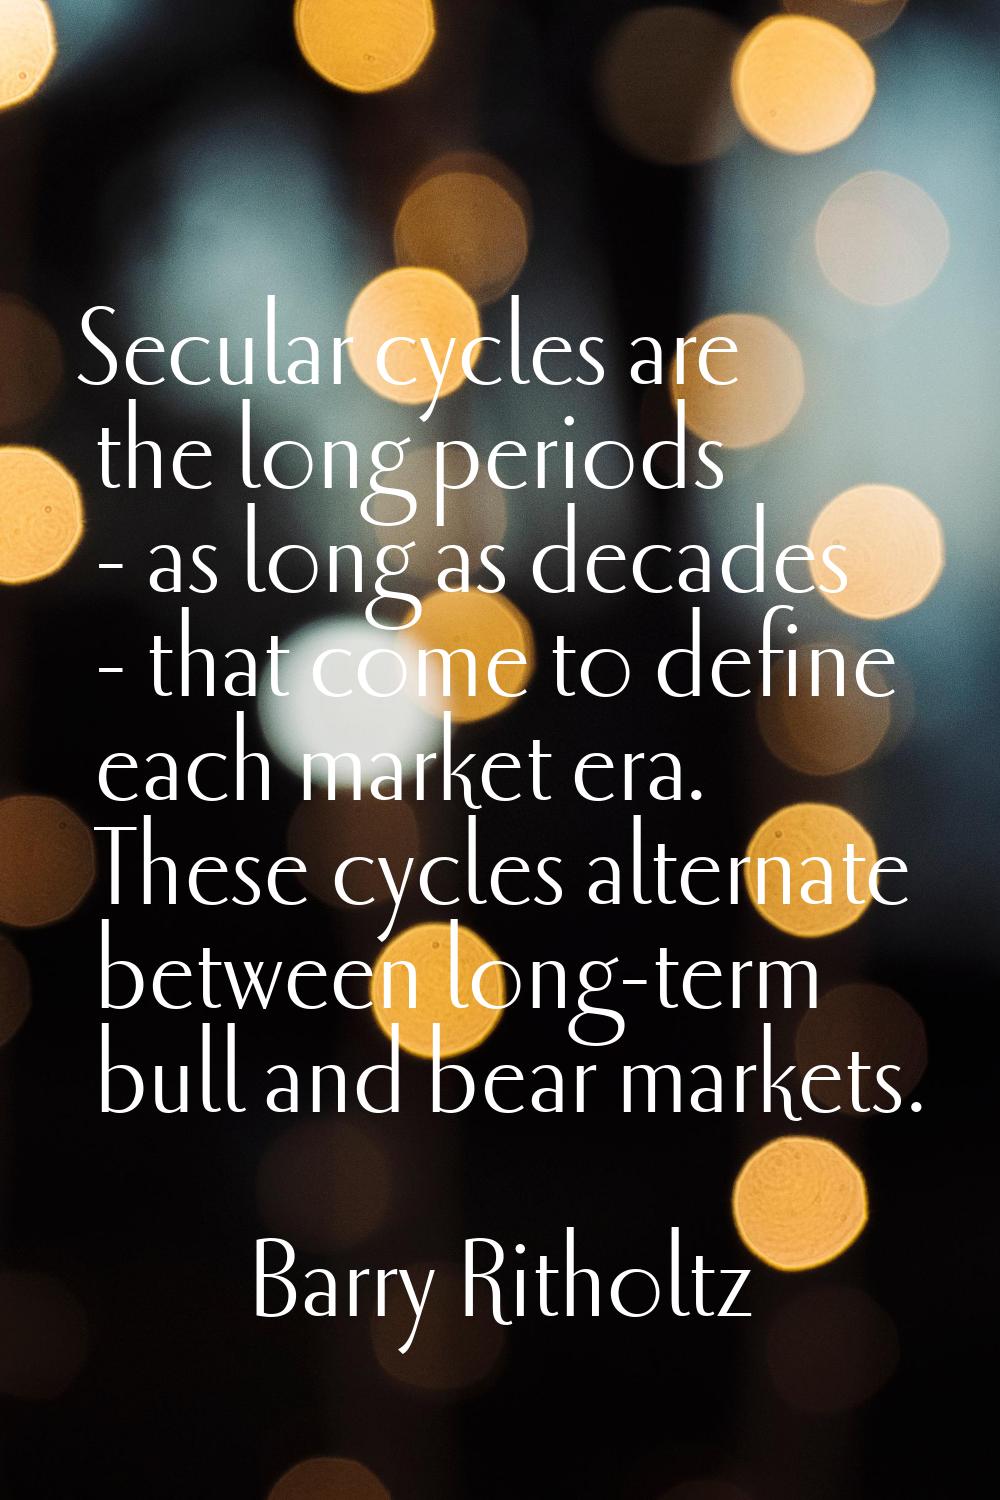 Secular cycles are the long periods - as long as decades - that come to define each market era. The